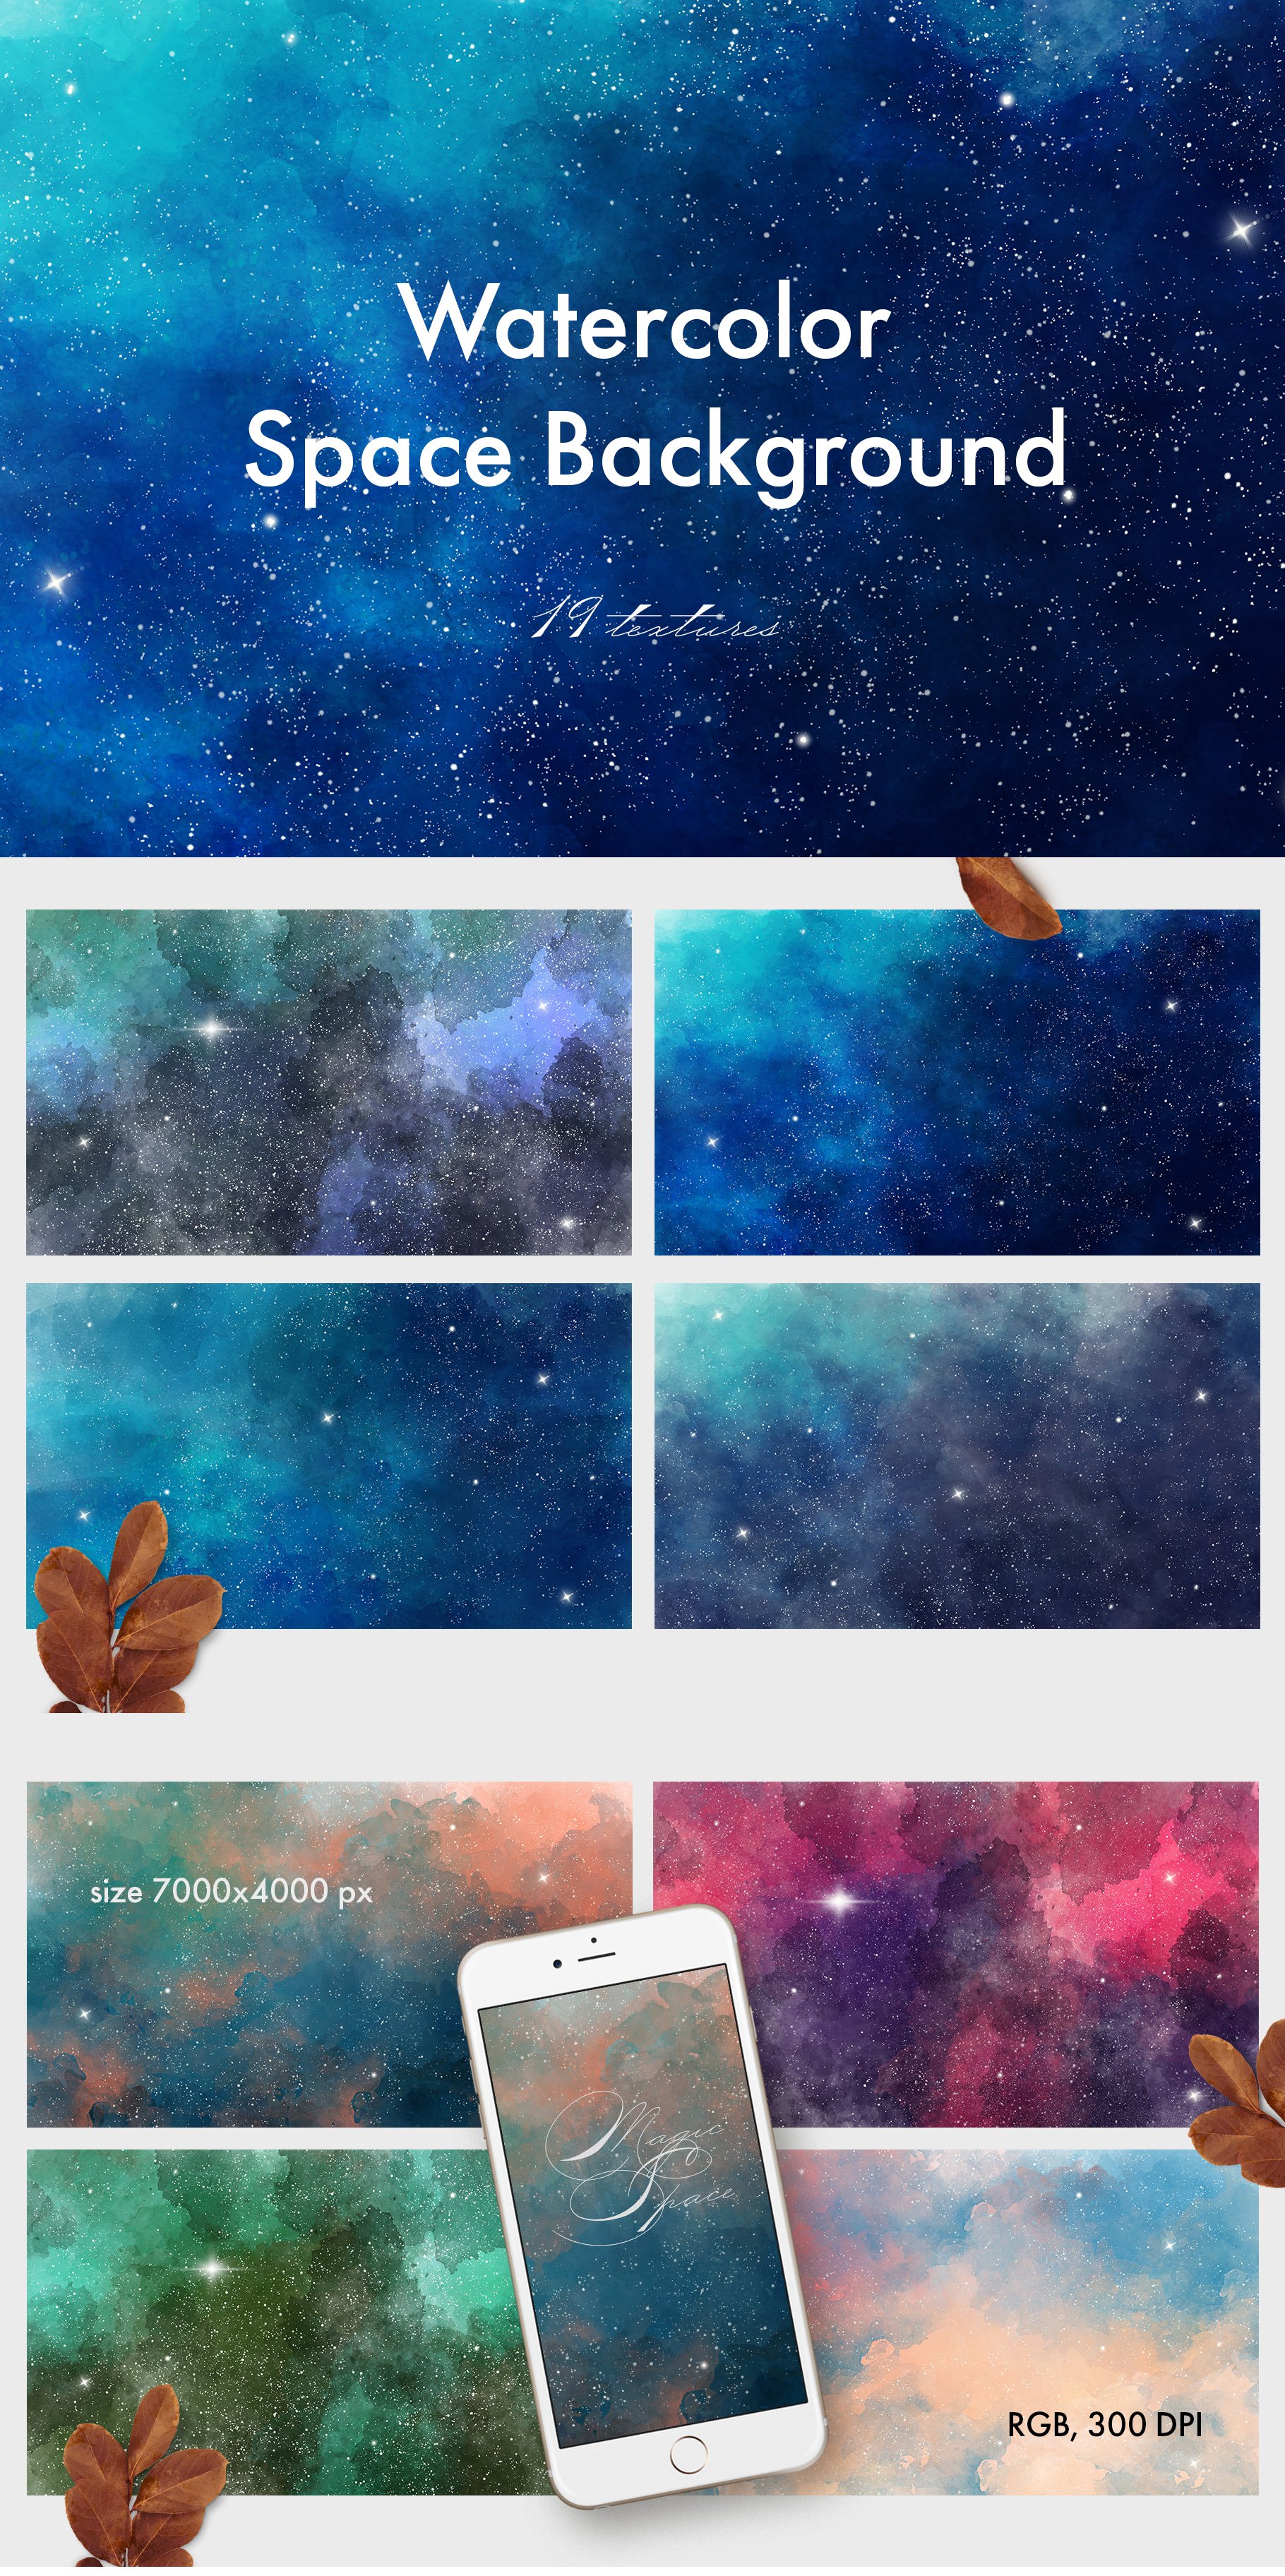 Watercolor Starry Sky cover image.